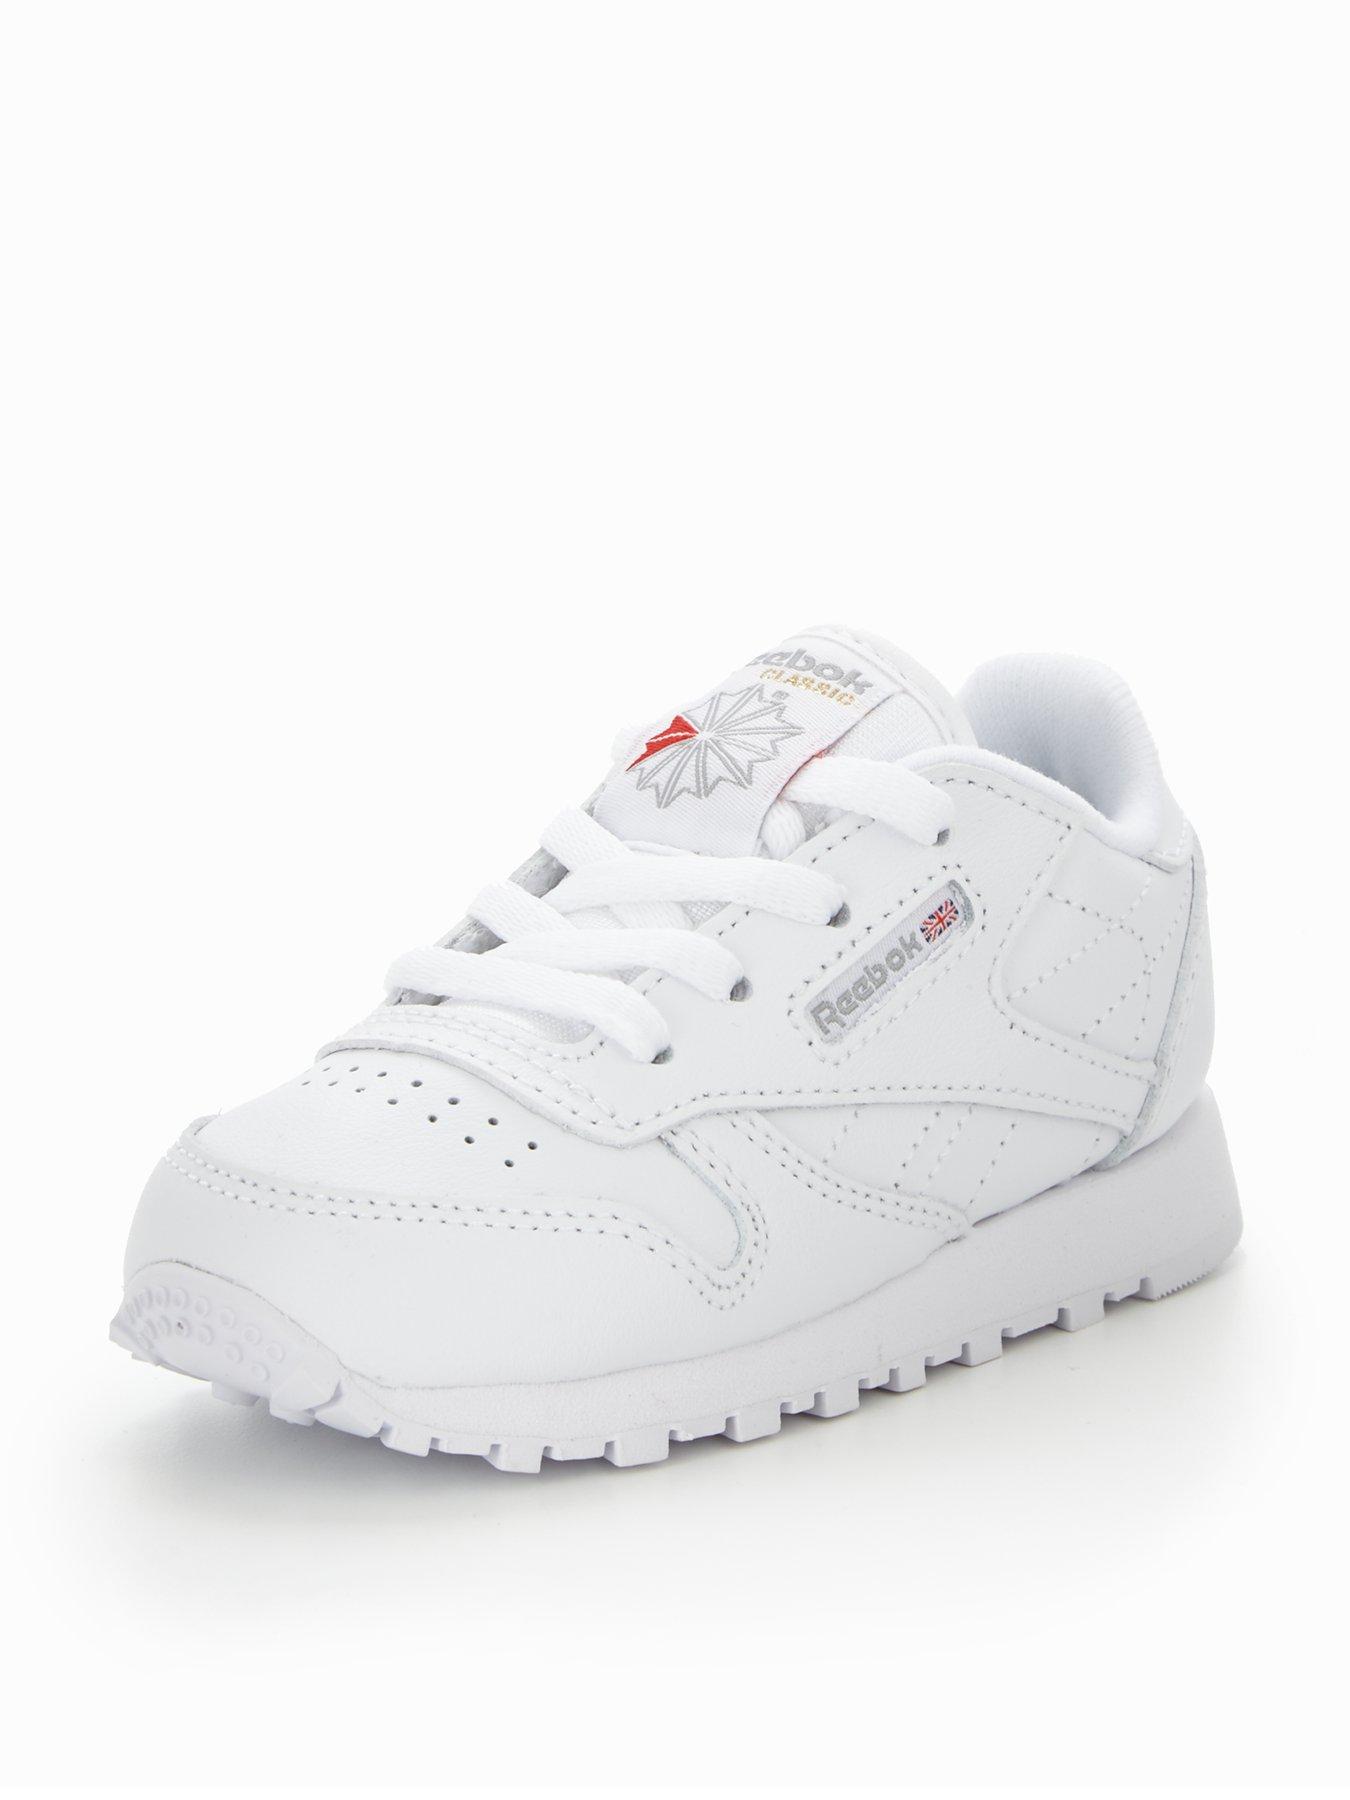 Reebok Classic Leather Infant Trainer 